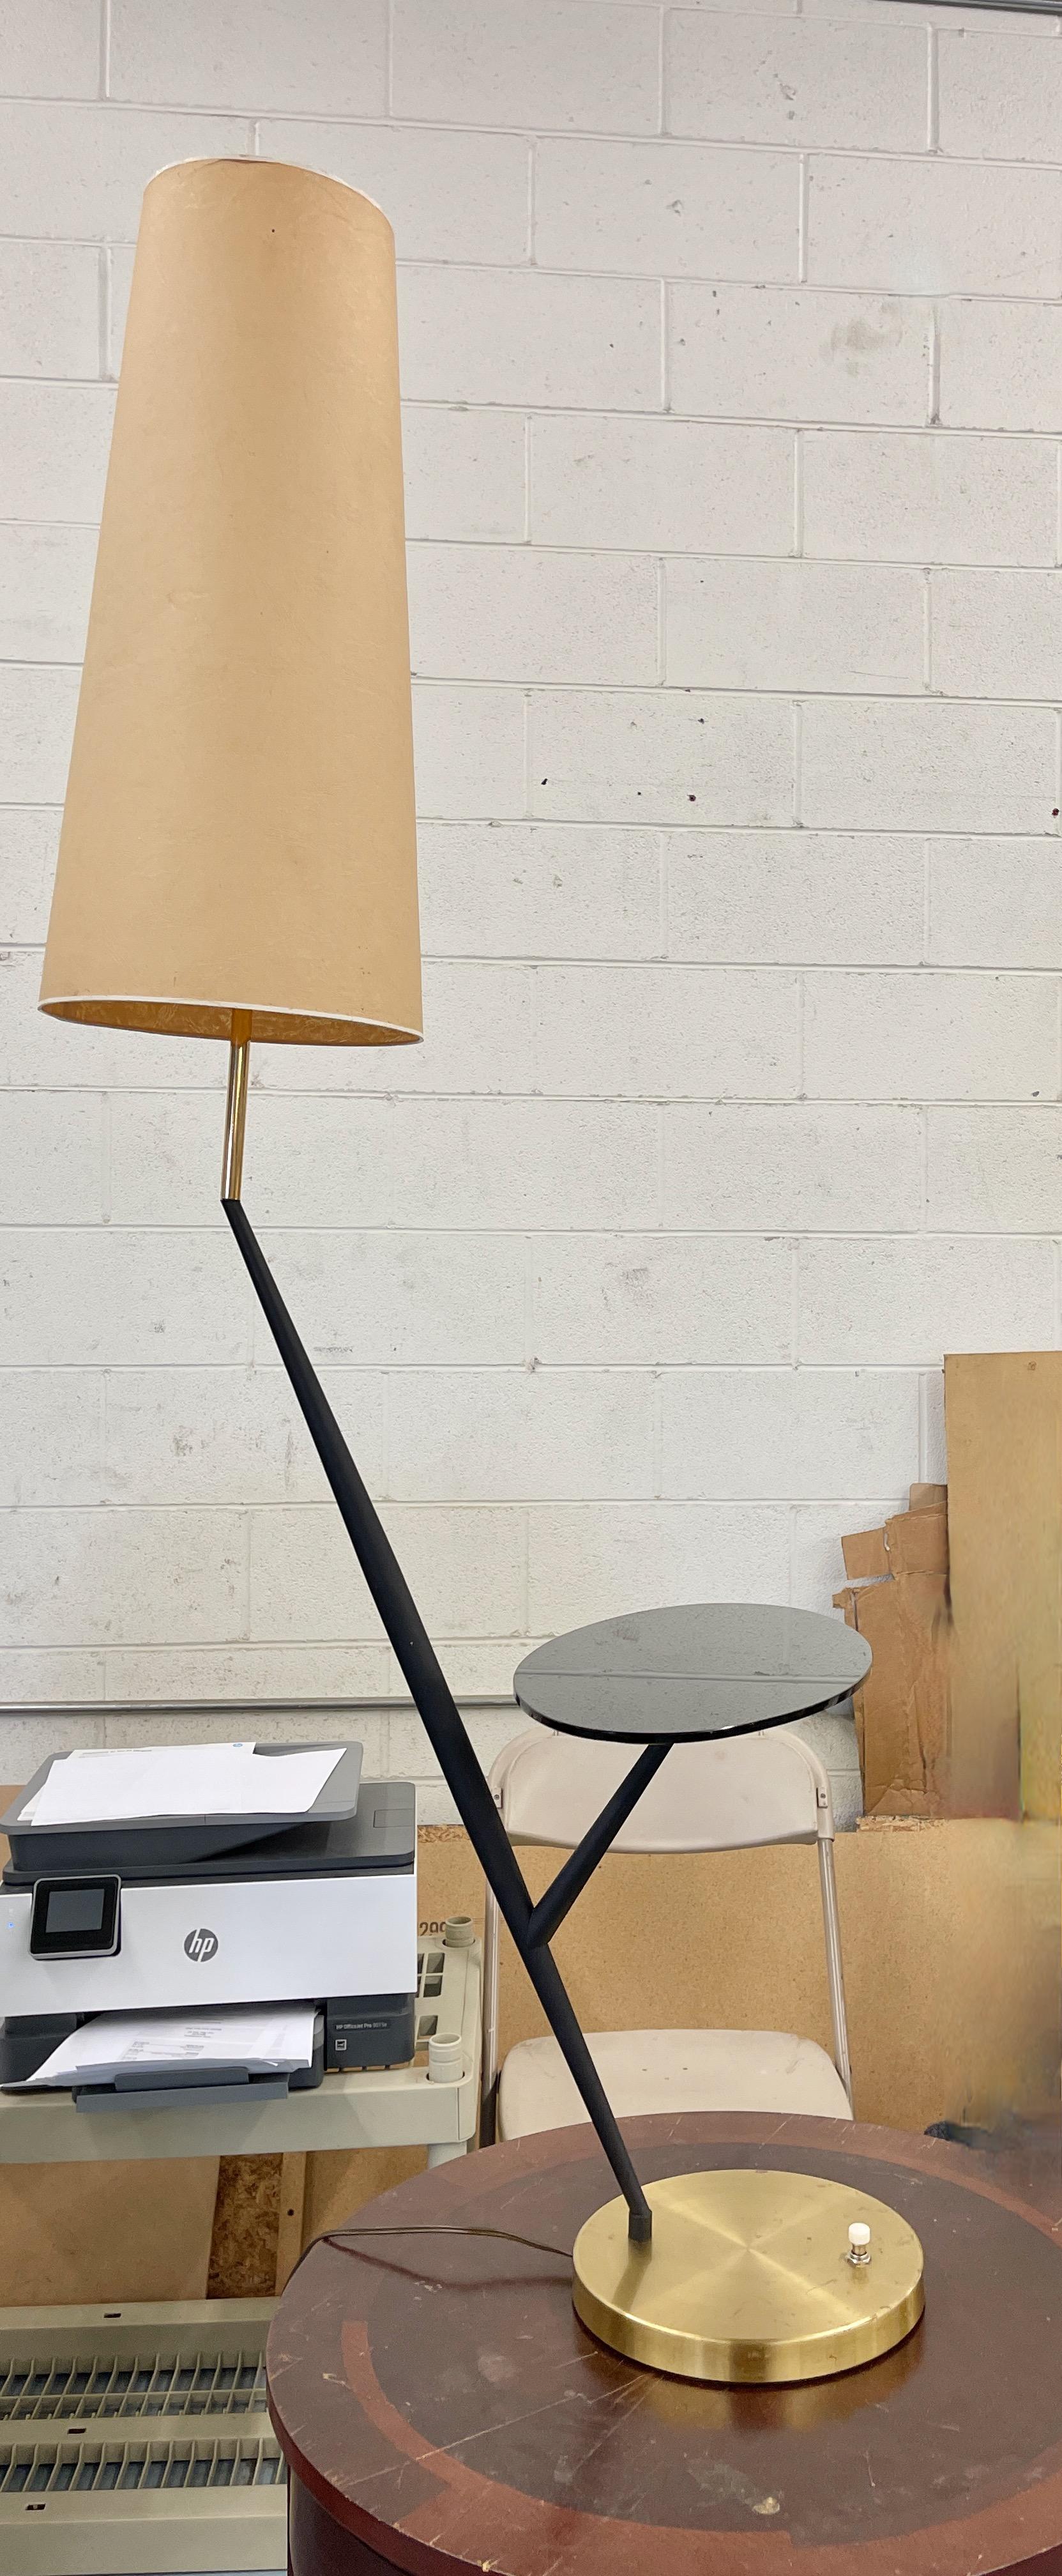 French early 1960’s sculptural floor (or table) lamp with a sculptural matte black elongated double tapered metal stem cocked at ~75 degree angle and having an 8 inch attenuated branch supporting an elliptical oval plateau of polished black